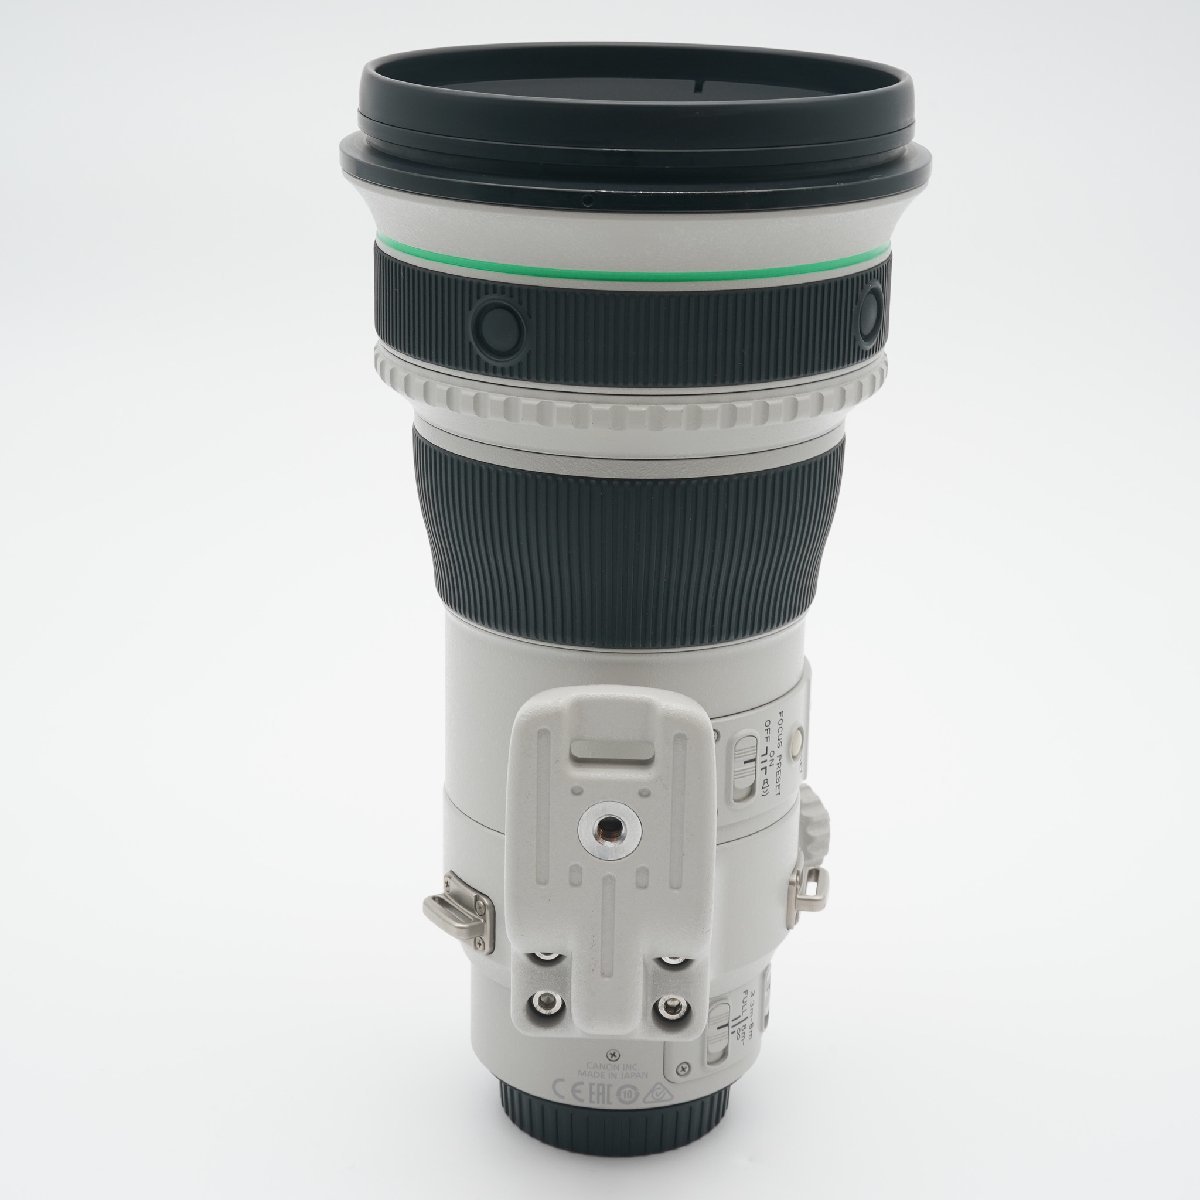  new goods class Canon EF 400mm F4 DO IS 2 USM